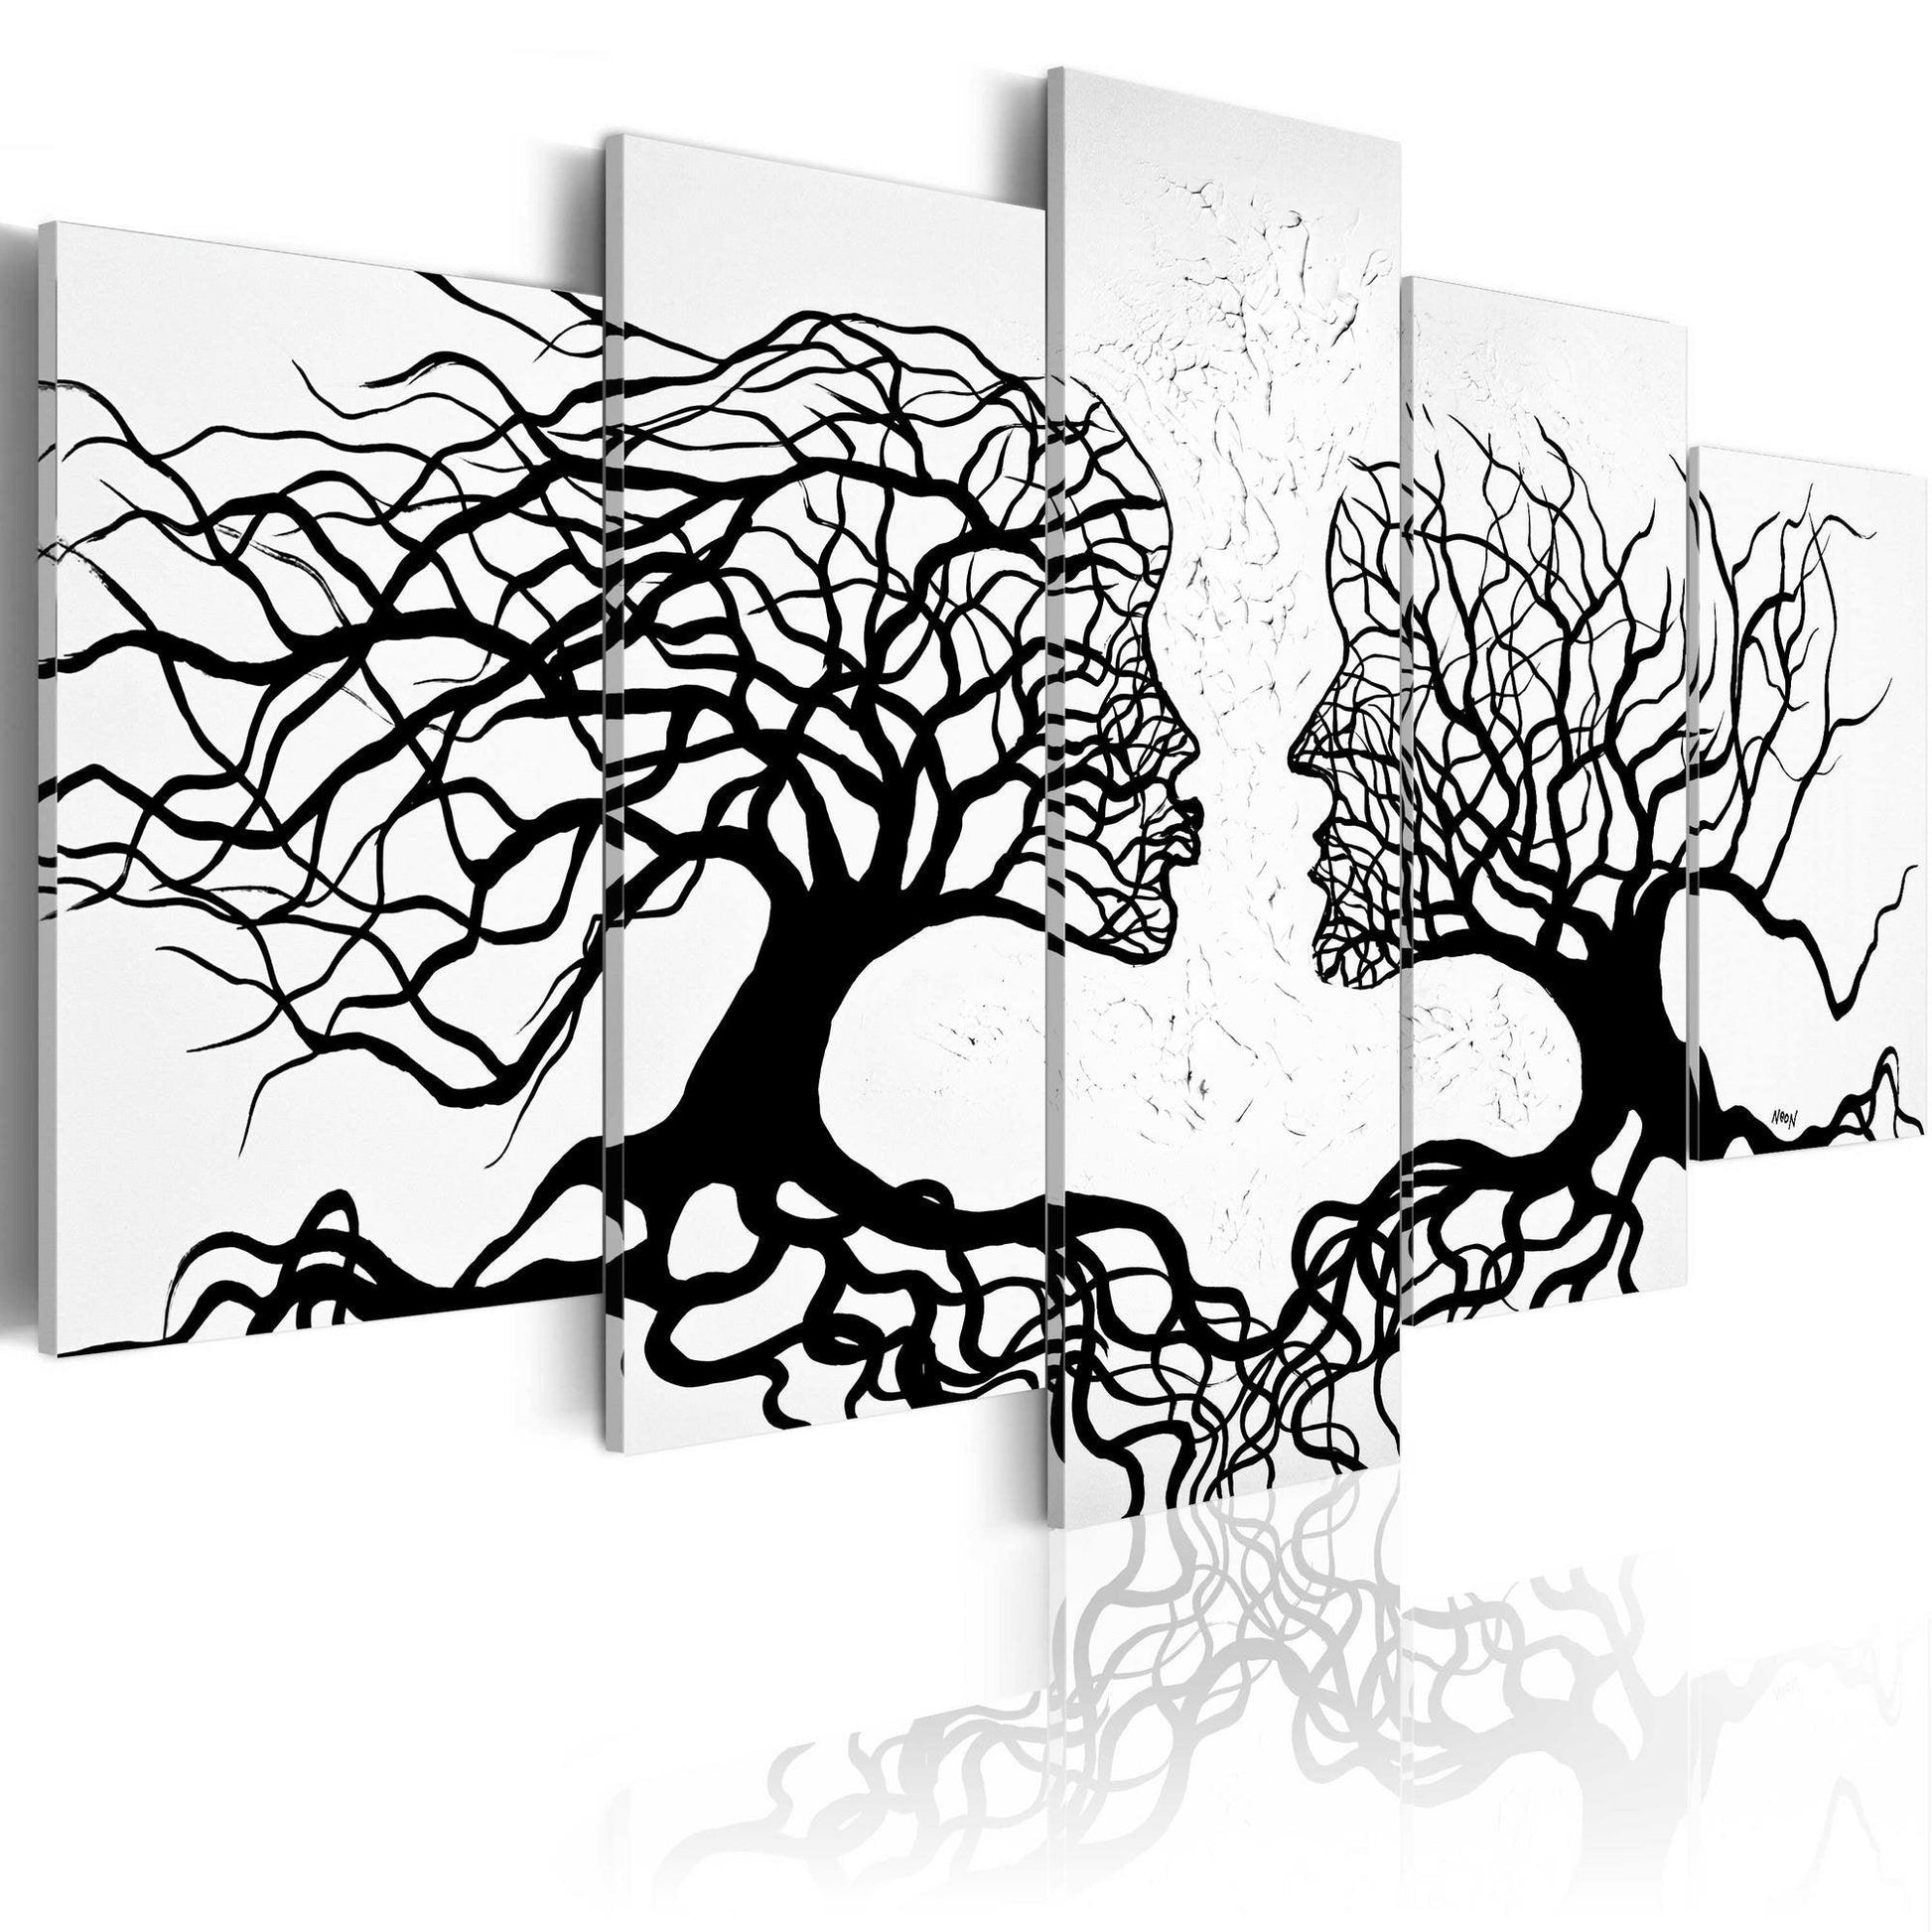 Canvas Print - The Kiss of the Wind - www.trendingbestsellers.com